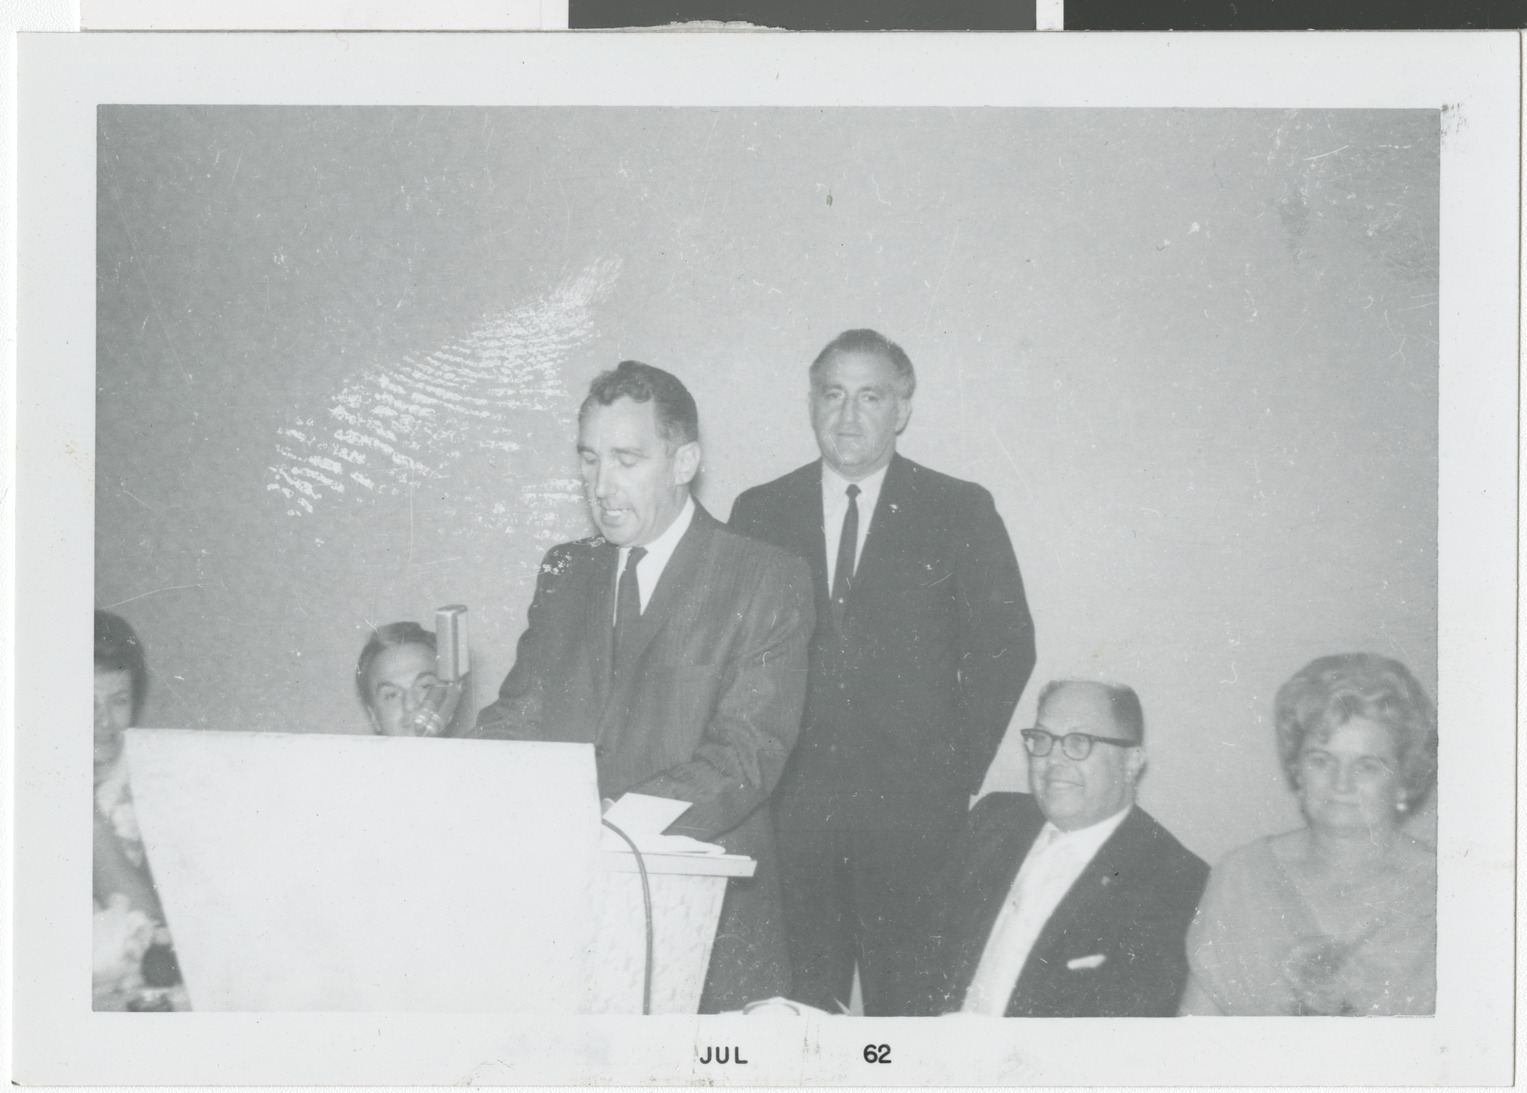 Photograph of a B'nai B'rith event, July 1962